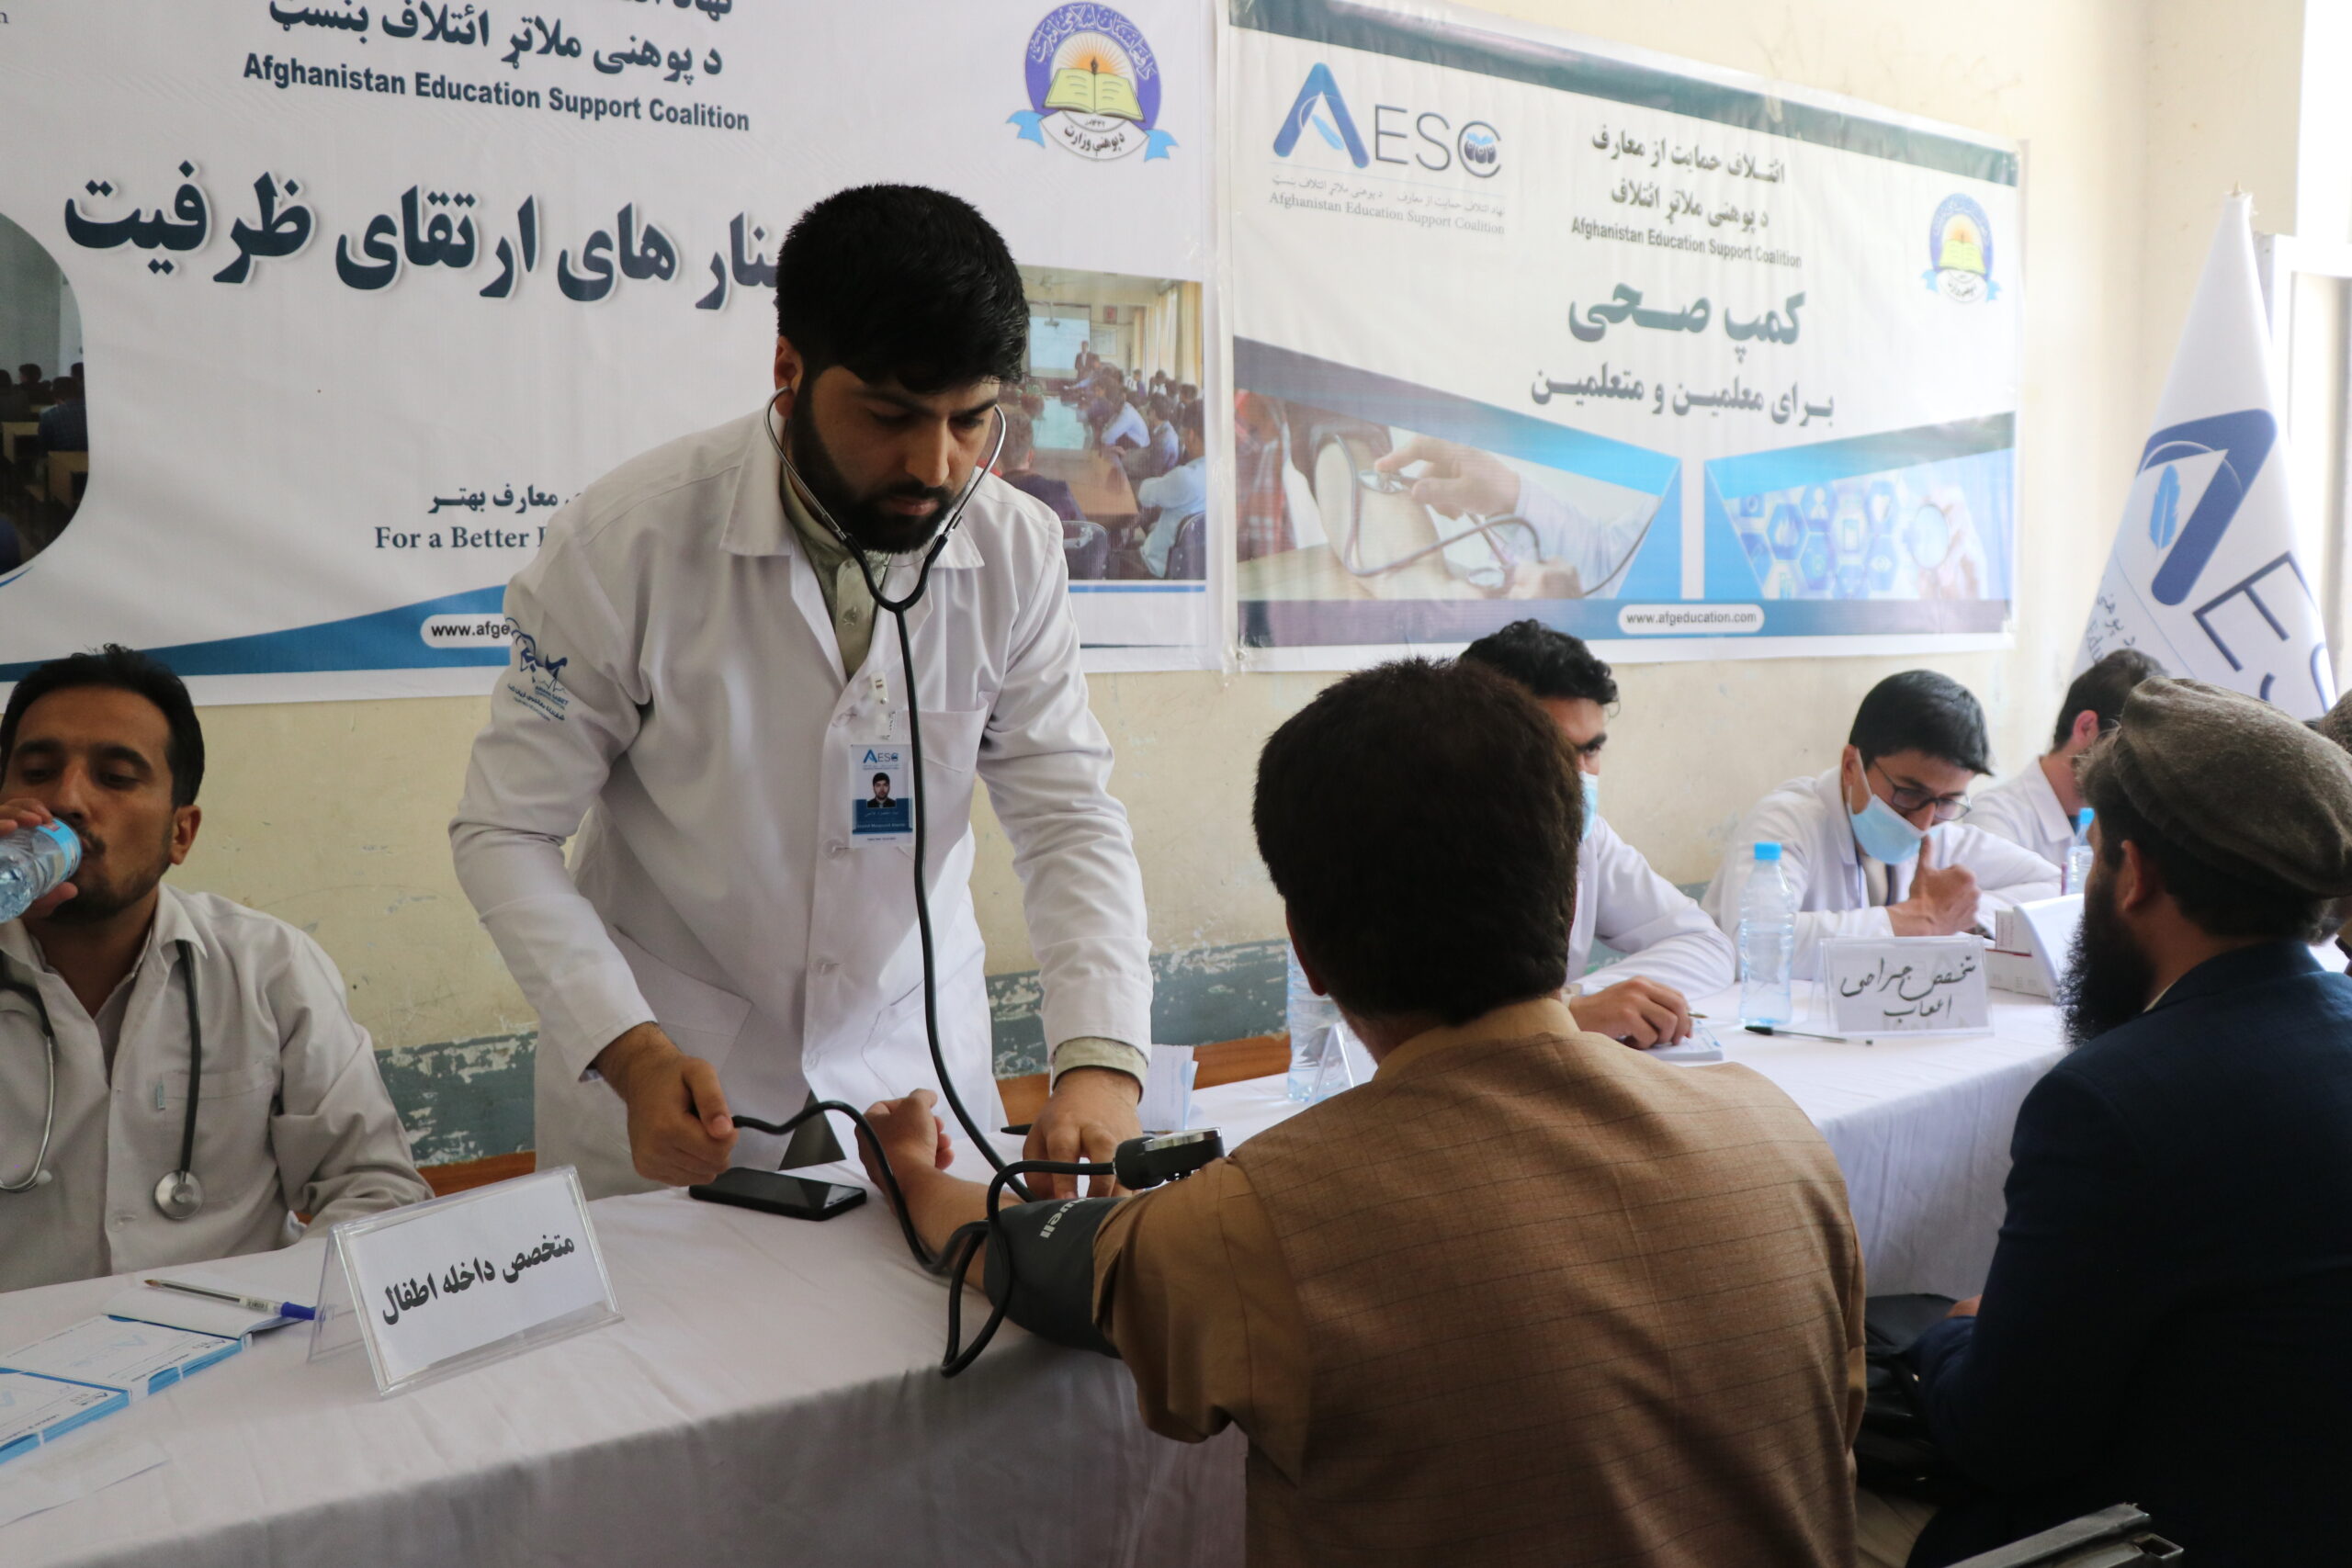 Free medical camp organised for teachers, students